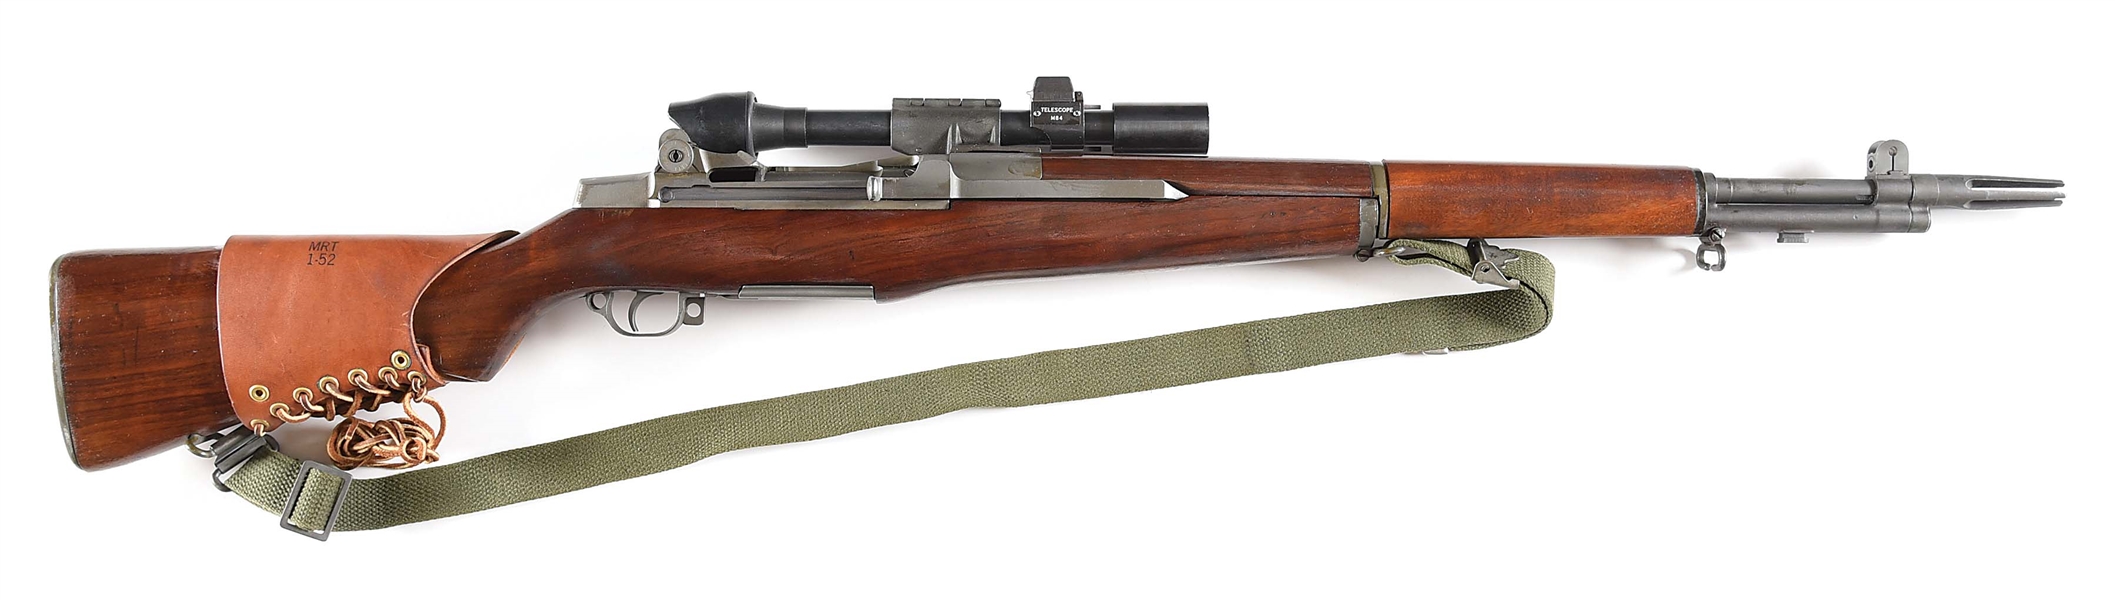 (C) SPRINGFIELD M1D SEMI-AUTOMATIC SNIPER STYLE RIFLE WITH CMP HARD CASE.